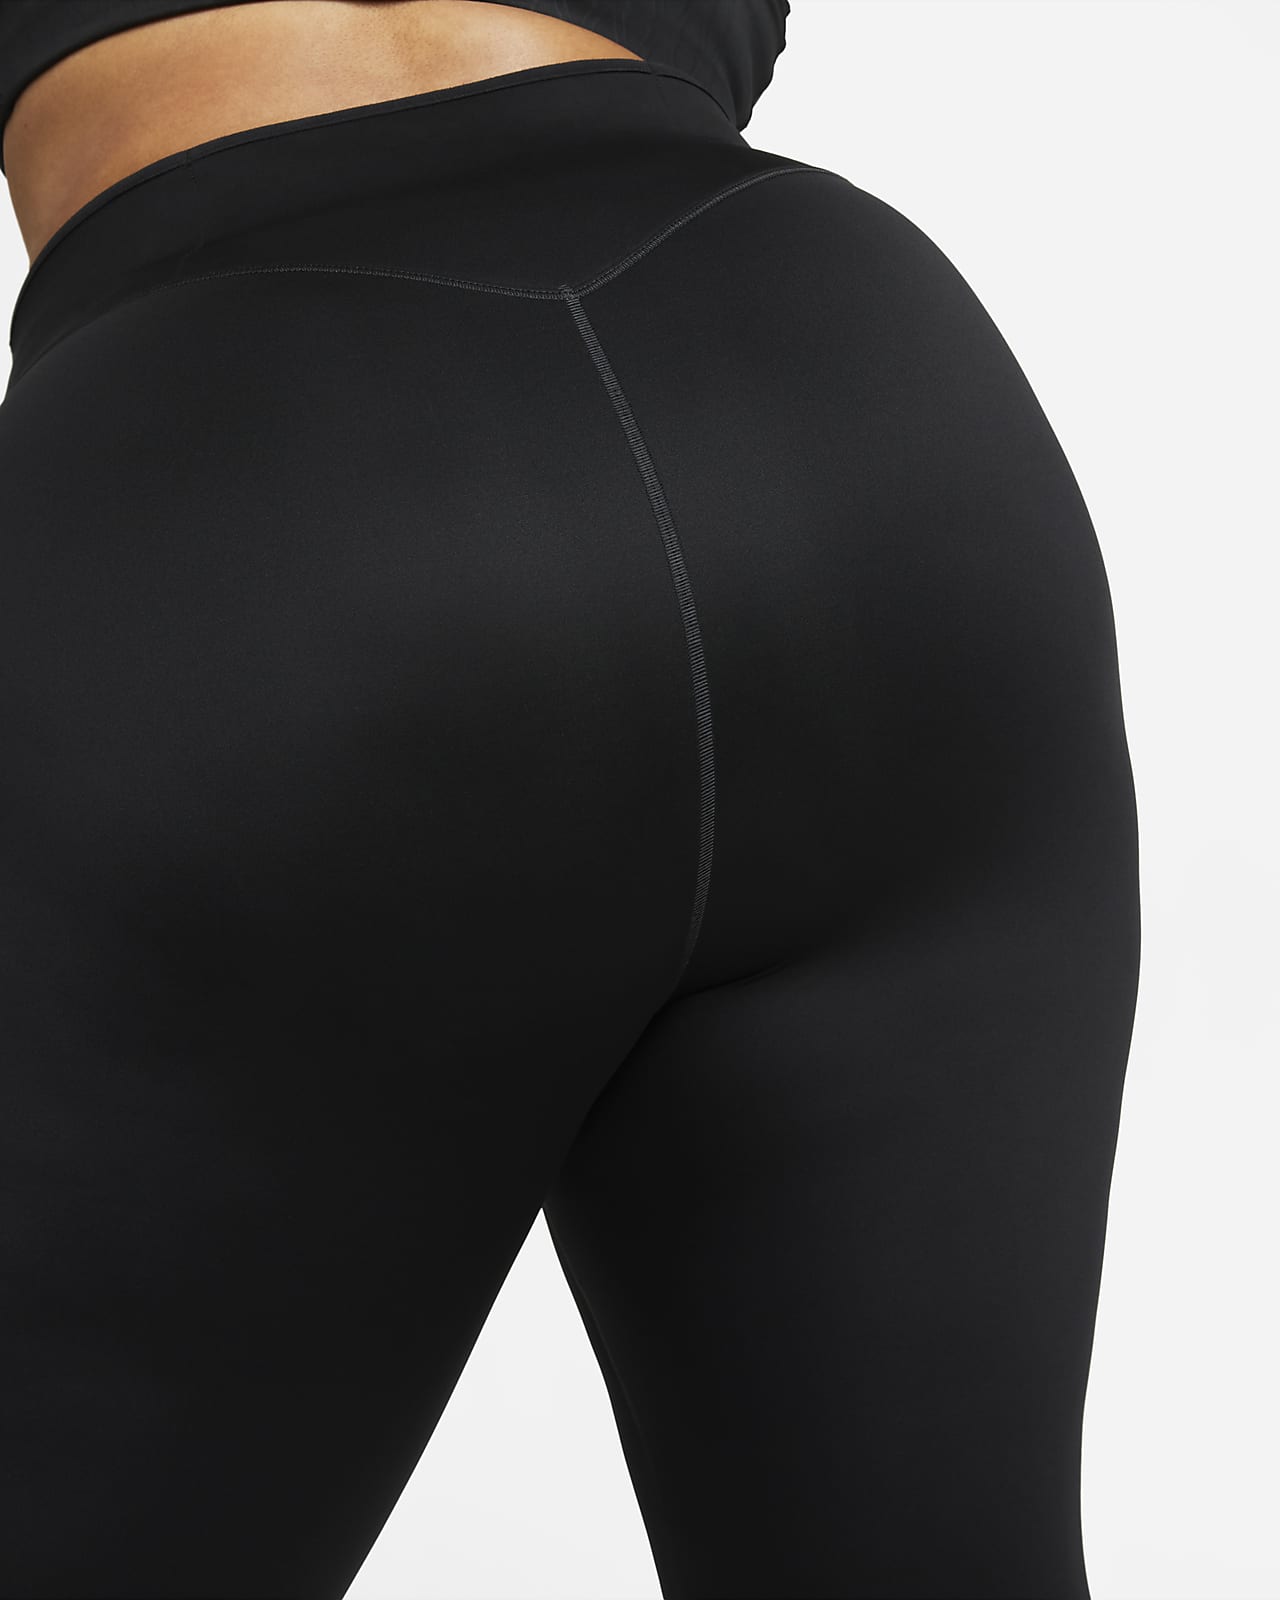 These $29 Yoga Pants With Pockets Have 13,000+ 5-Star Amazon Reviews - E!  Online